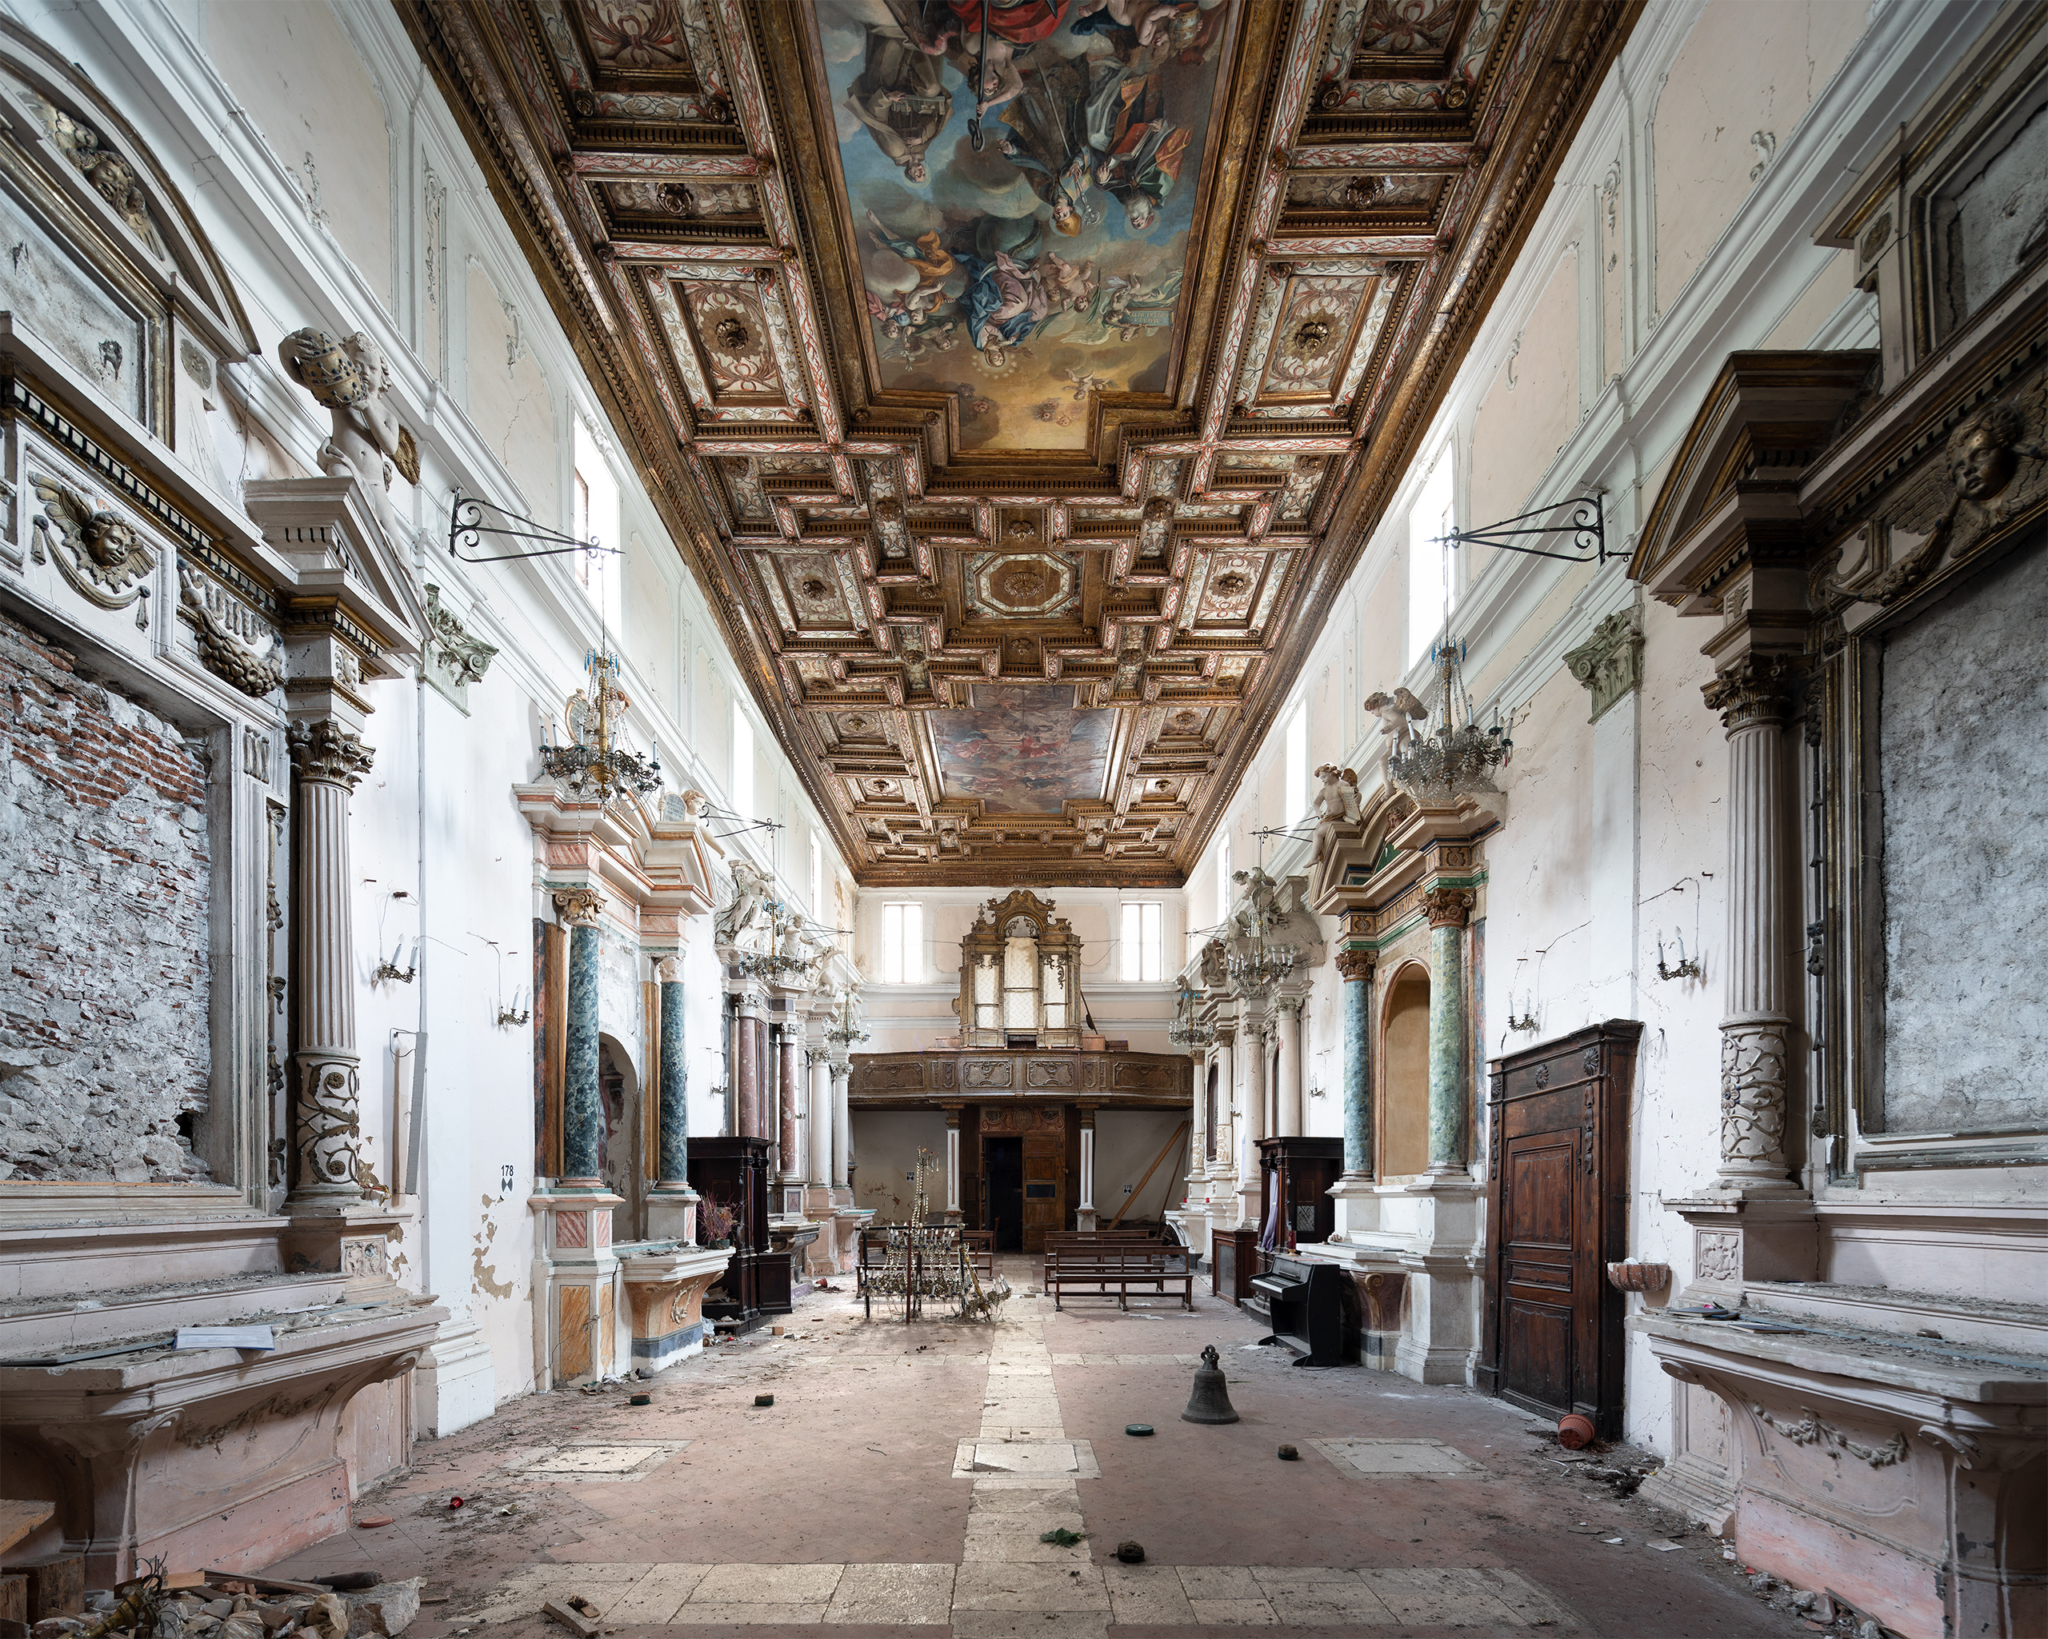 Abandoned church with stunning architecture inside a ghost town in Italy